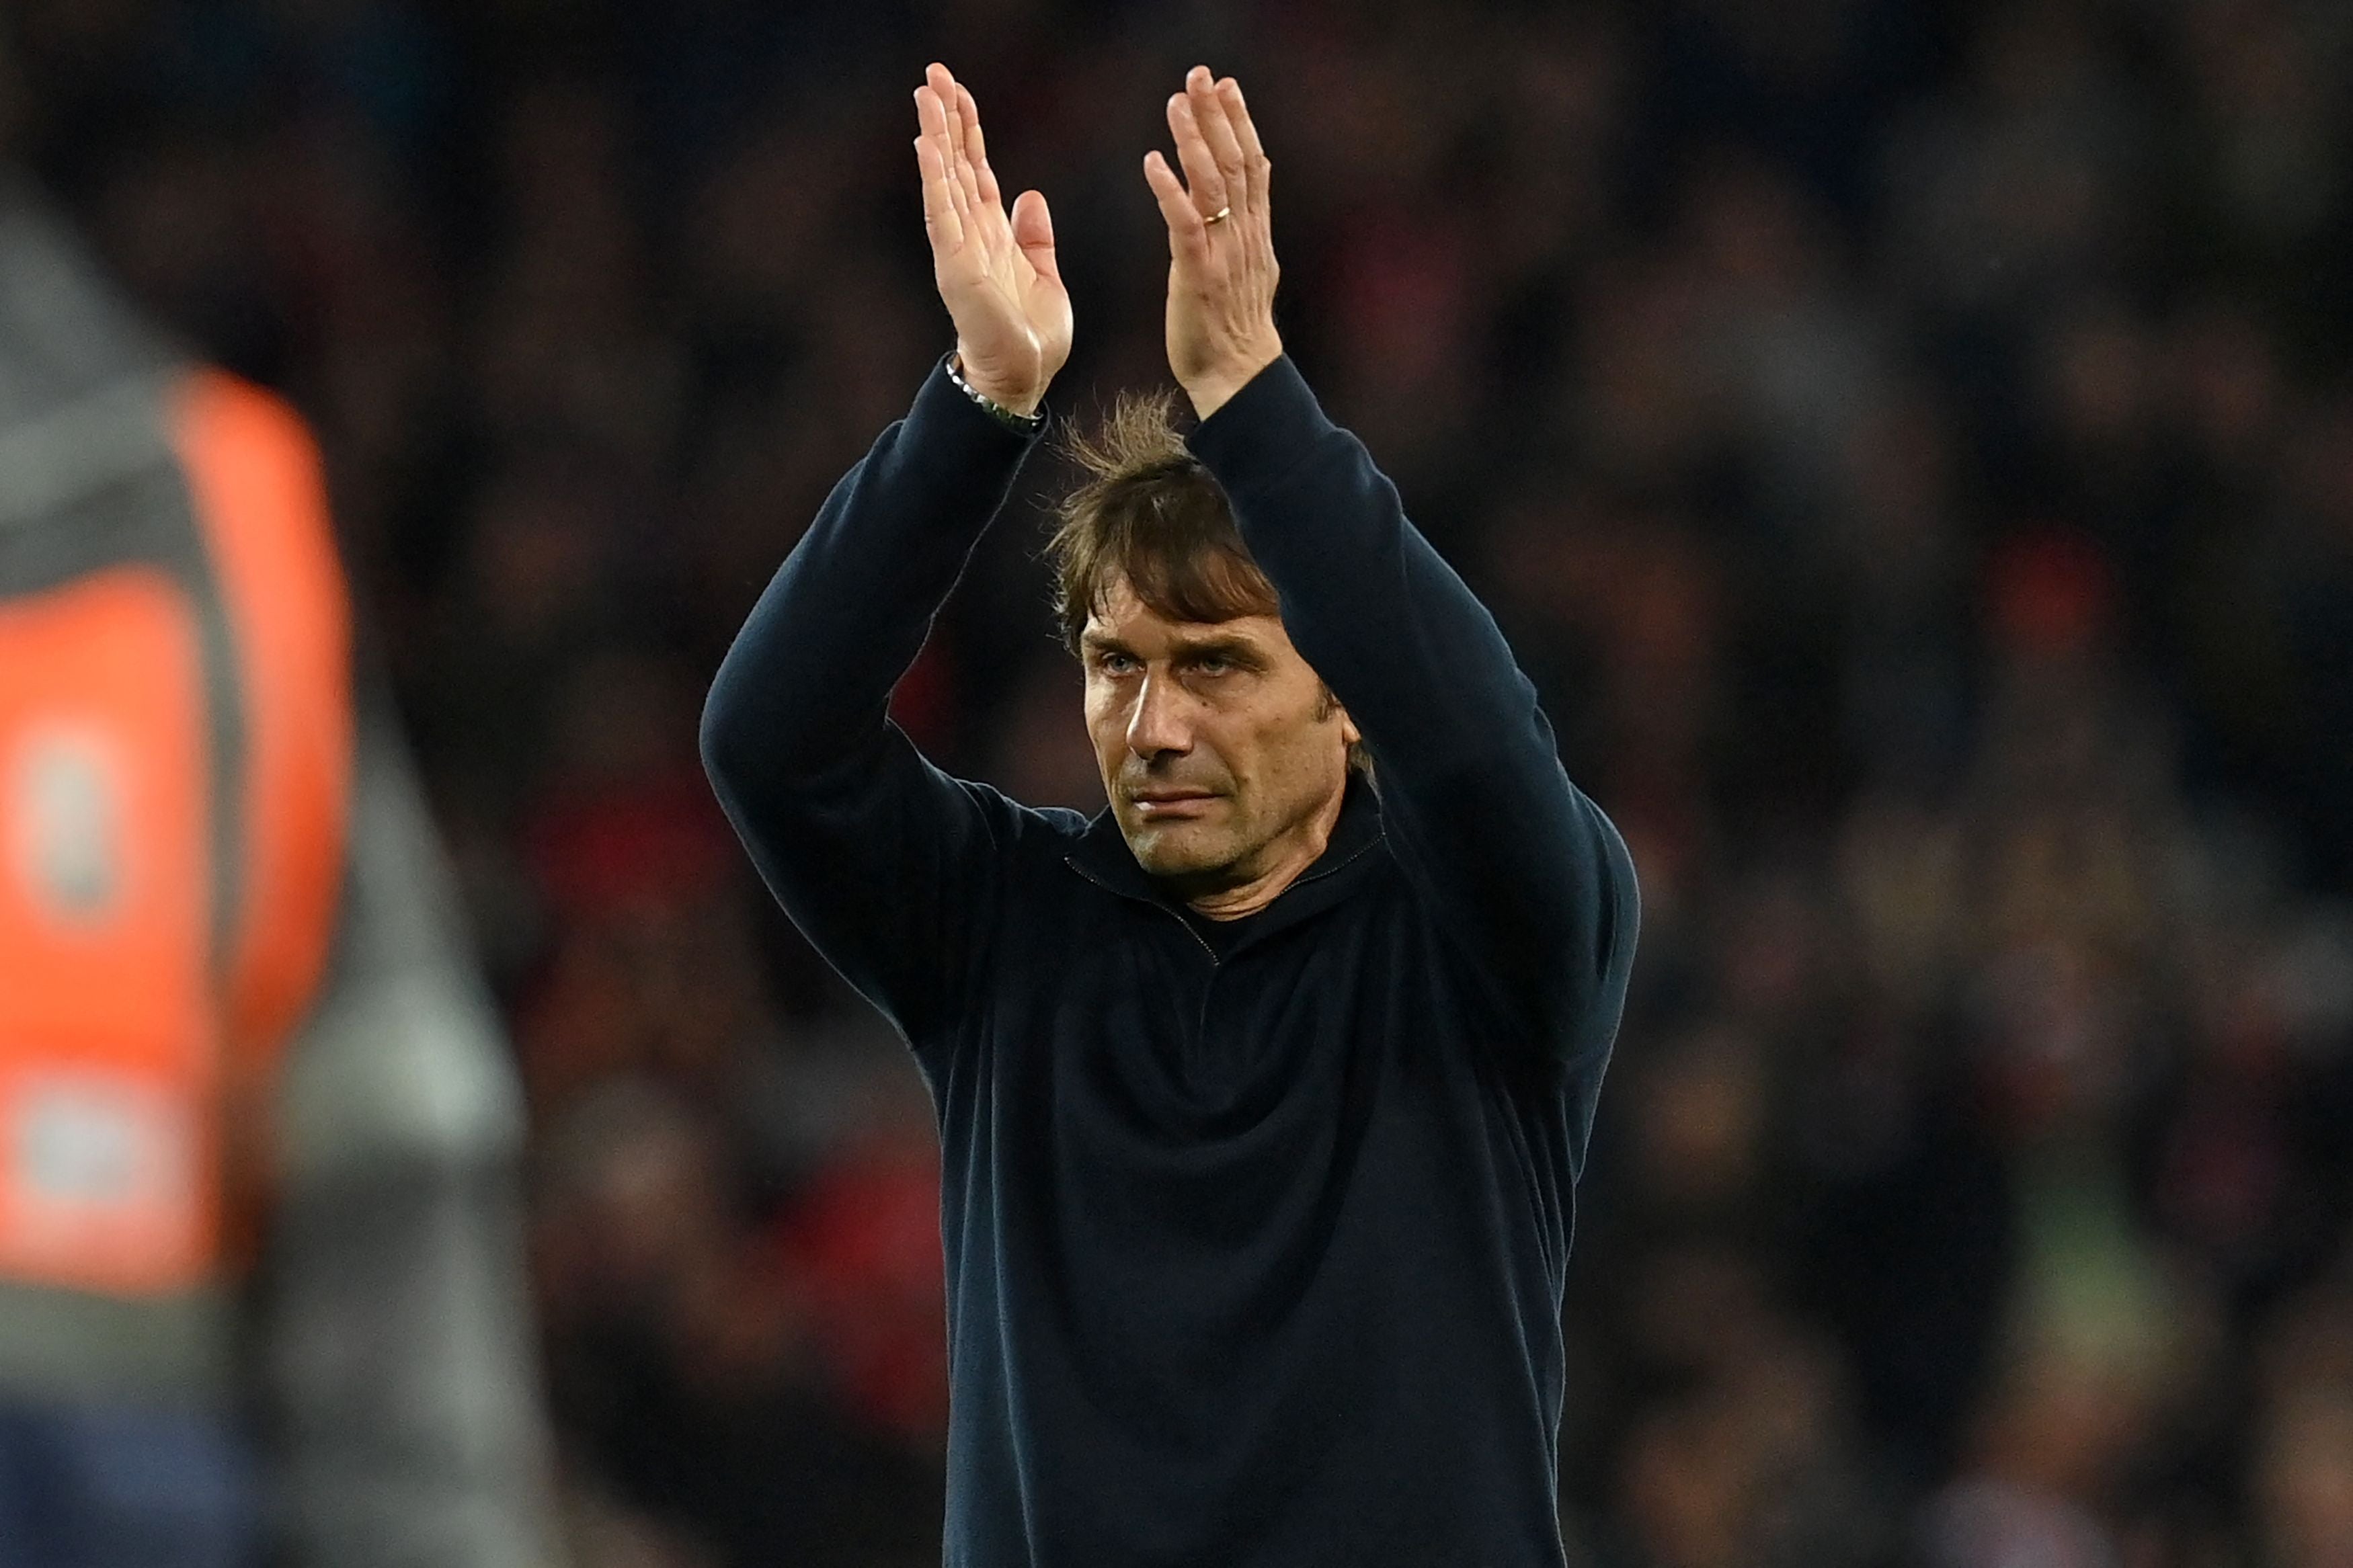 Antonio Conte applauds Tottenham’s supporters at Anfield on Saturday